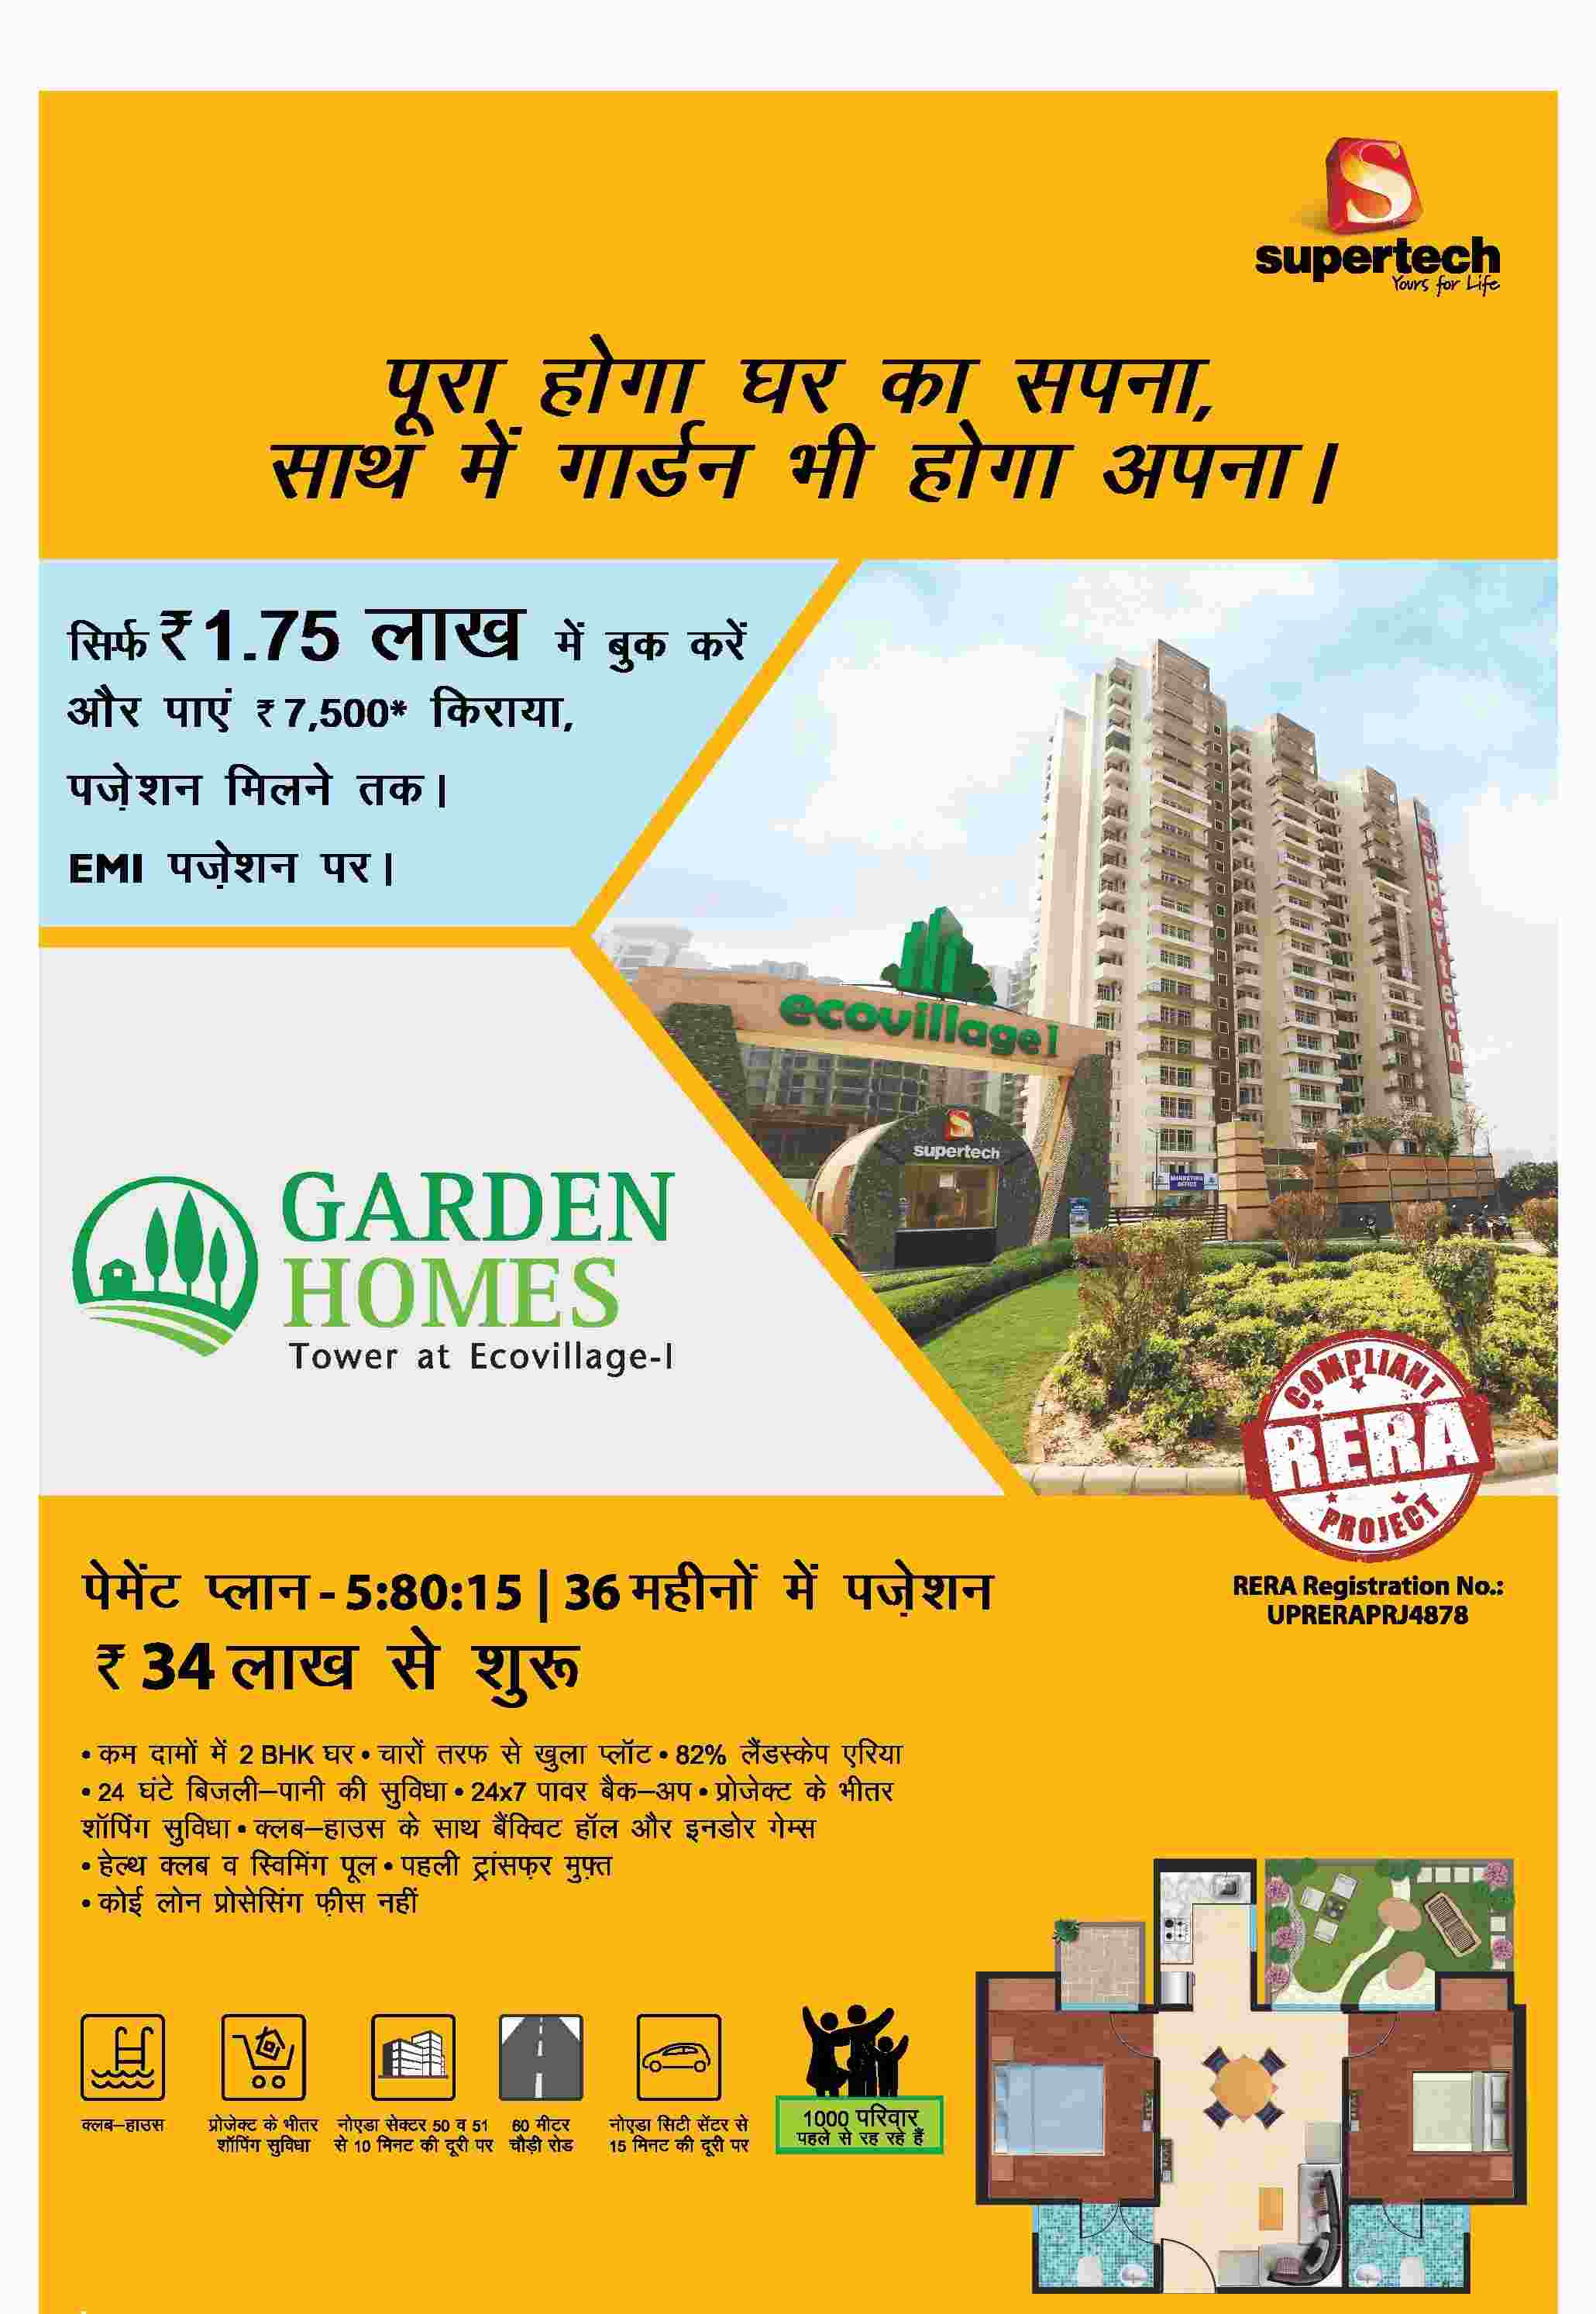 Enjoy the living experience that is very much right for you at Eco-village I in Greater Noida Update